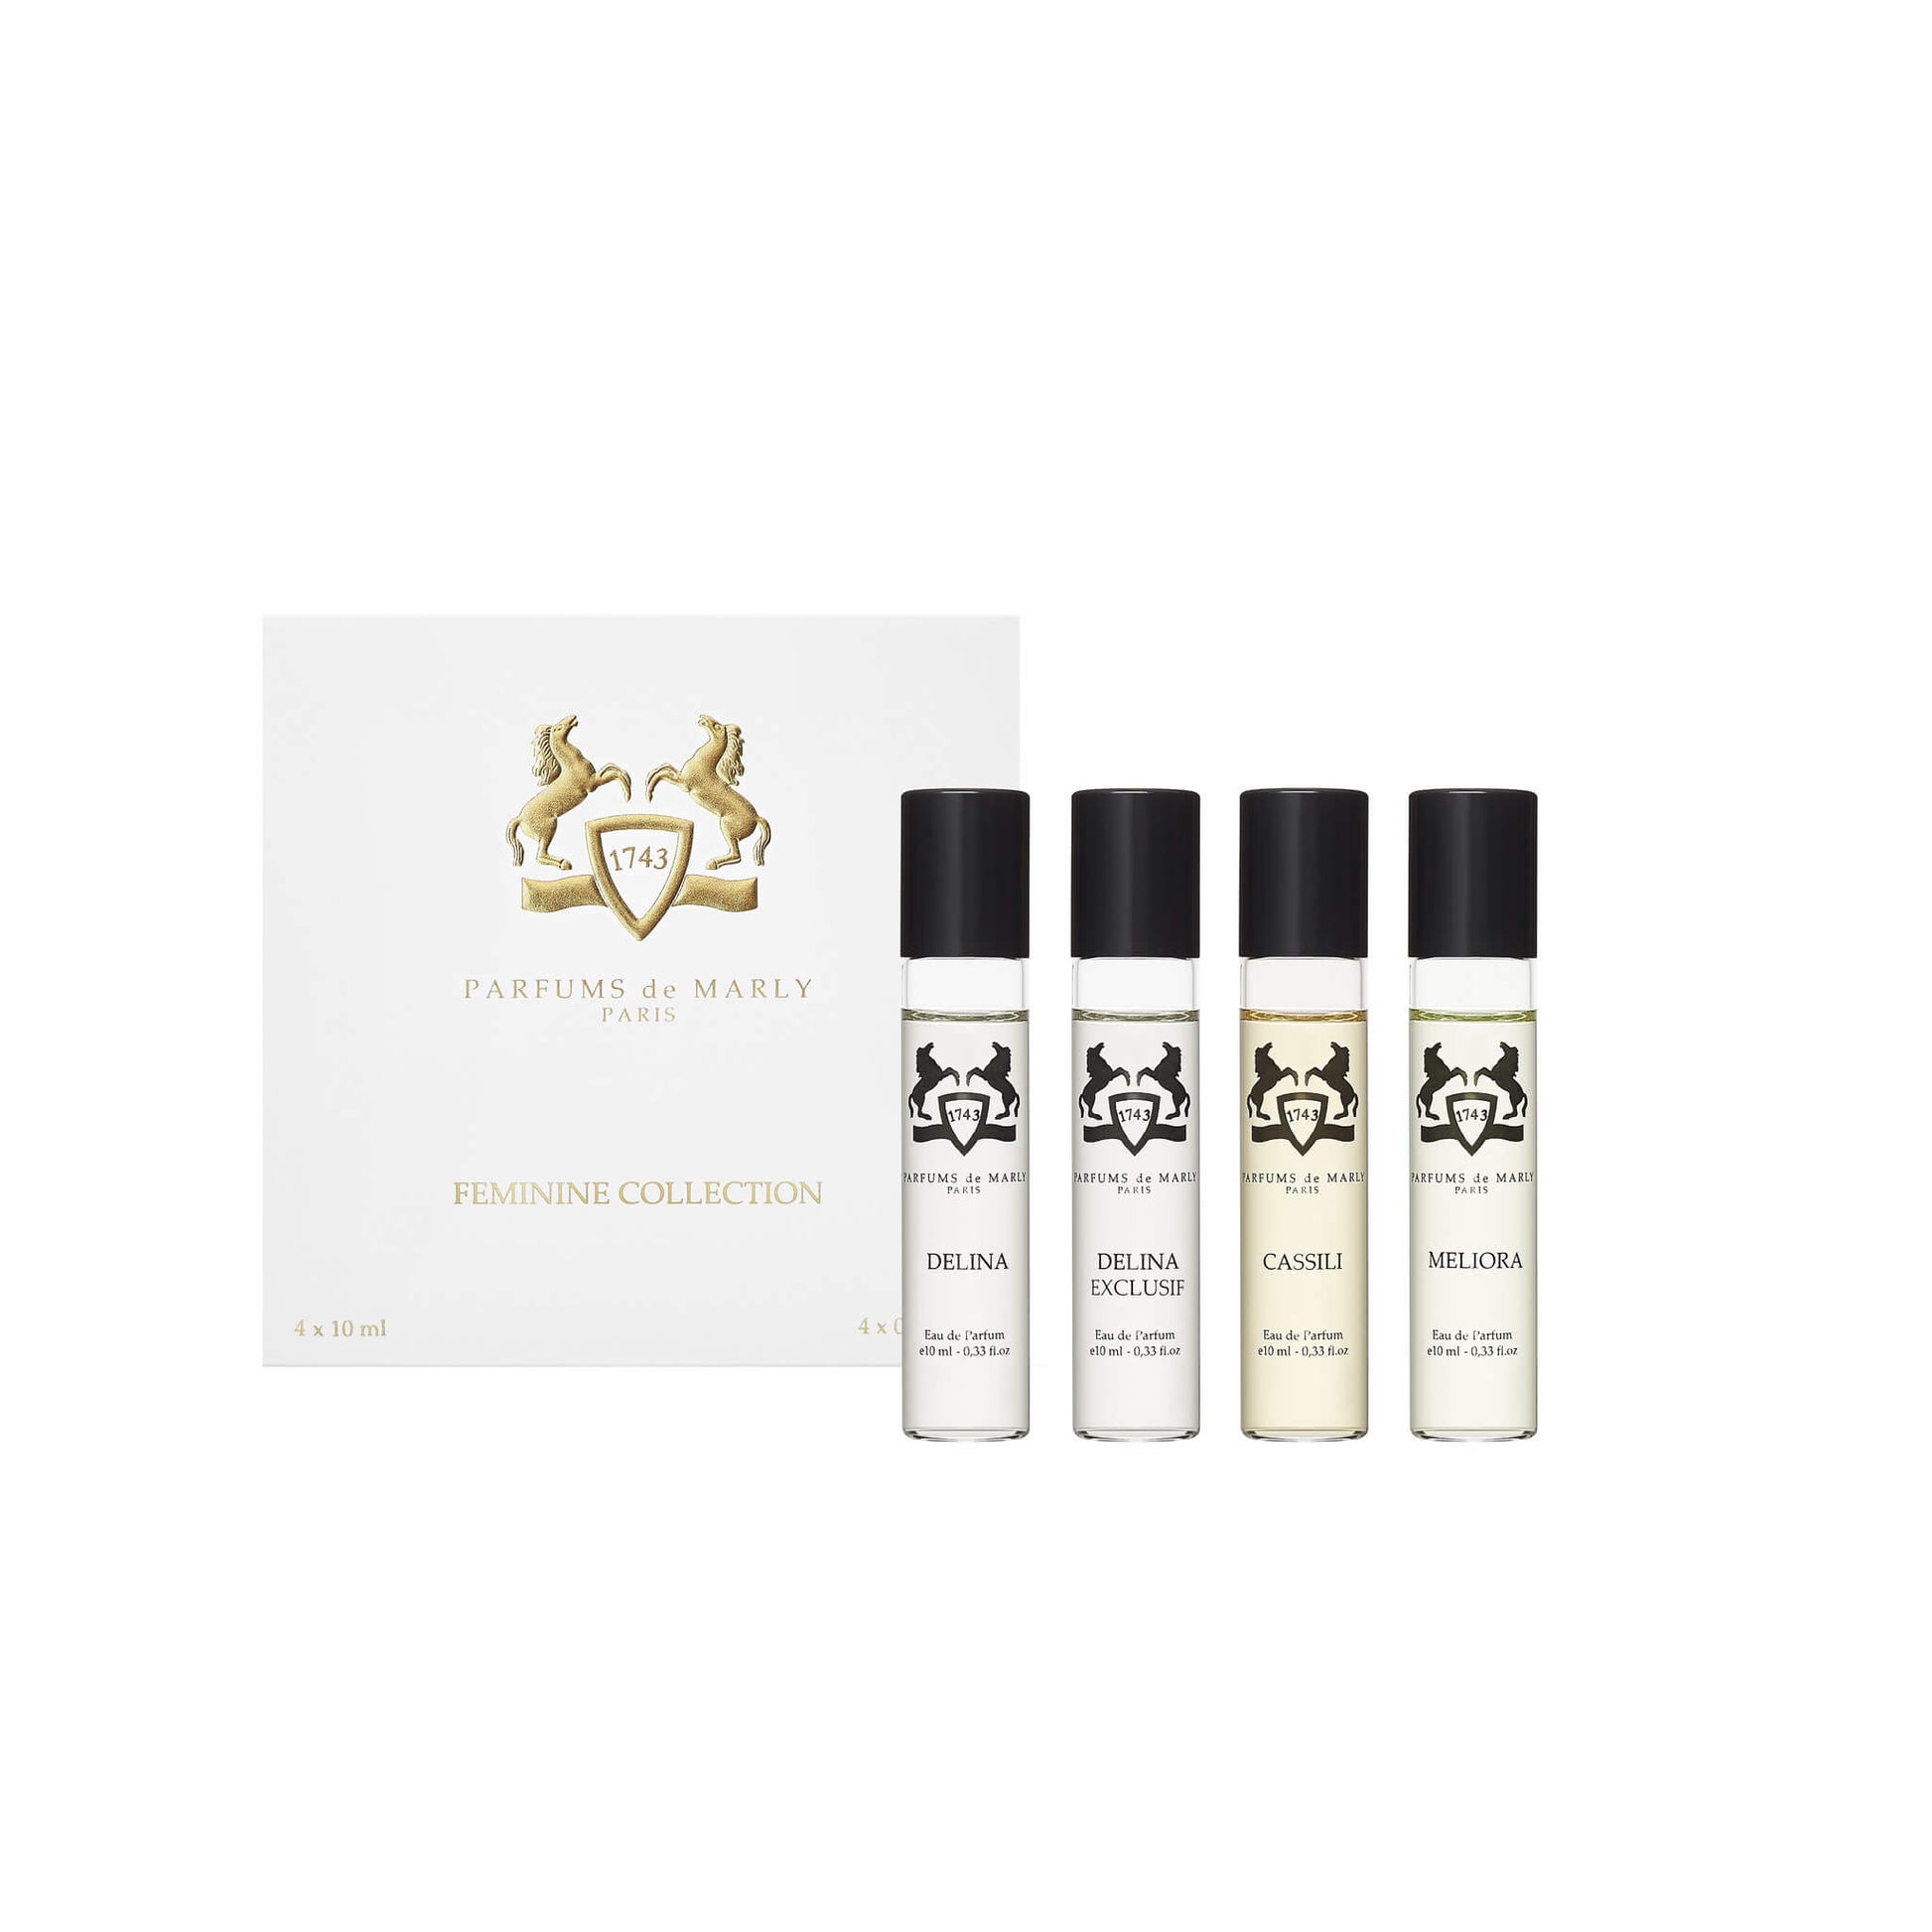 Parfums de Marly - Feminine Discovery Collection - 10ml x 4